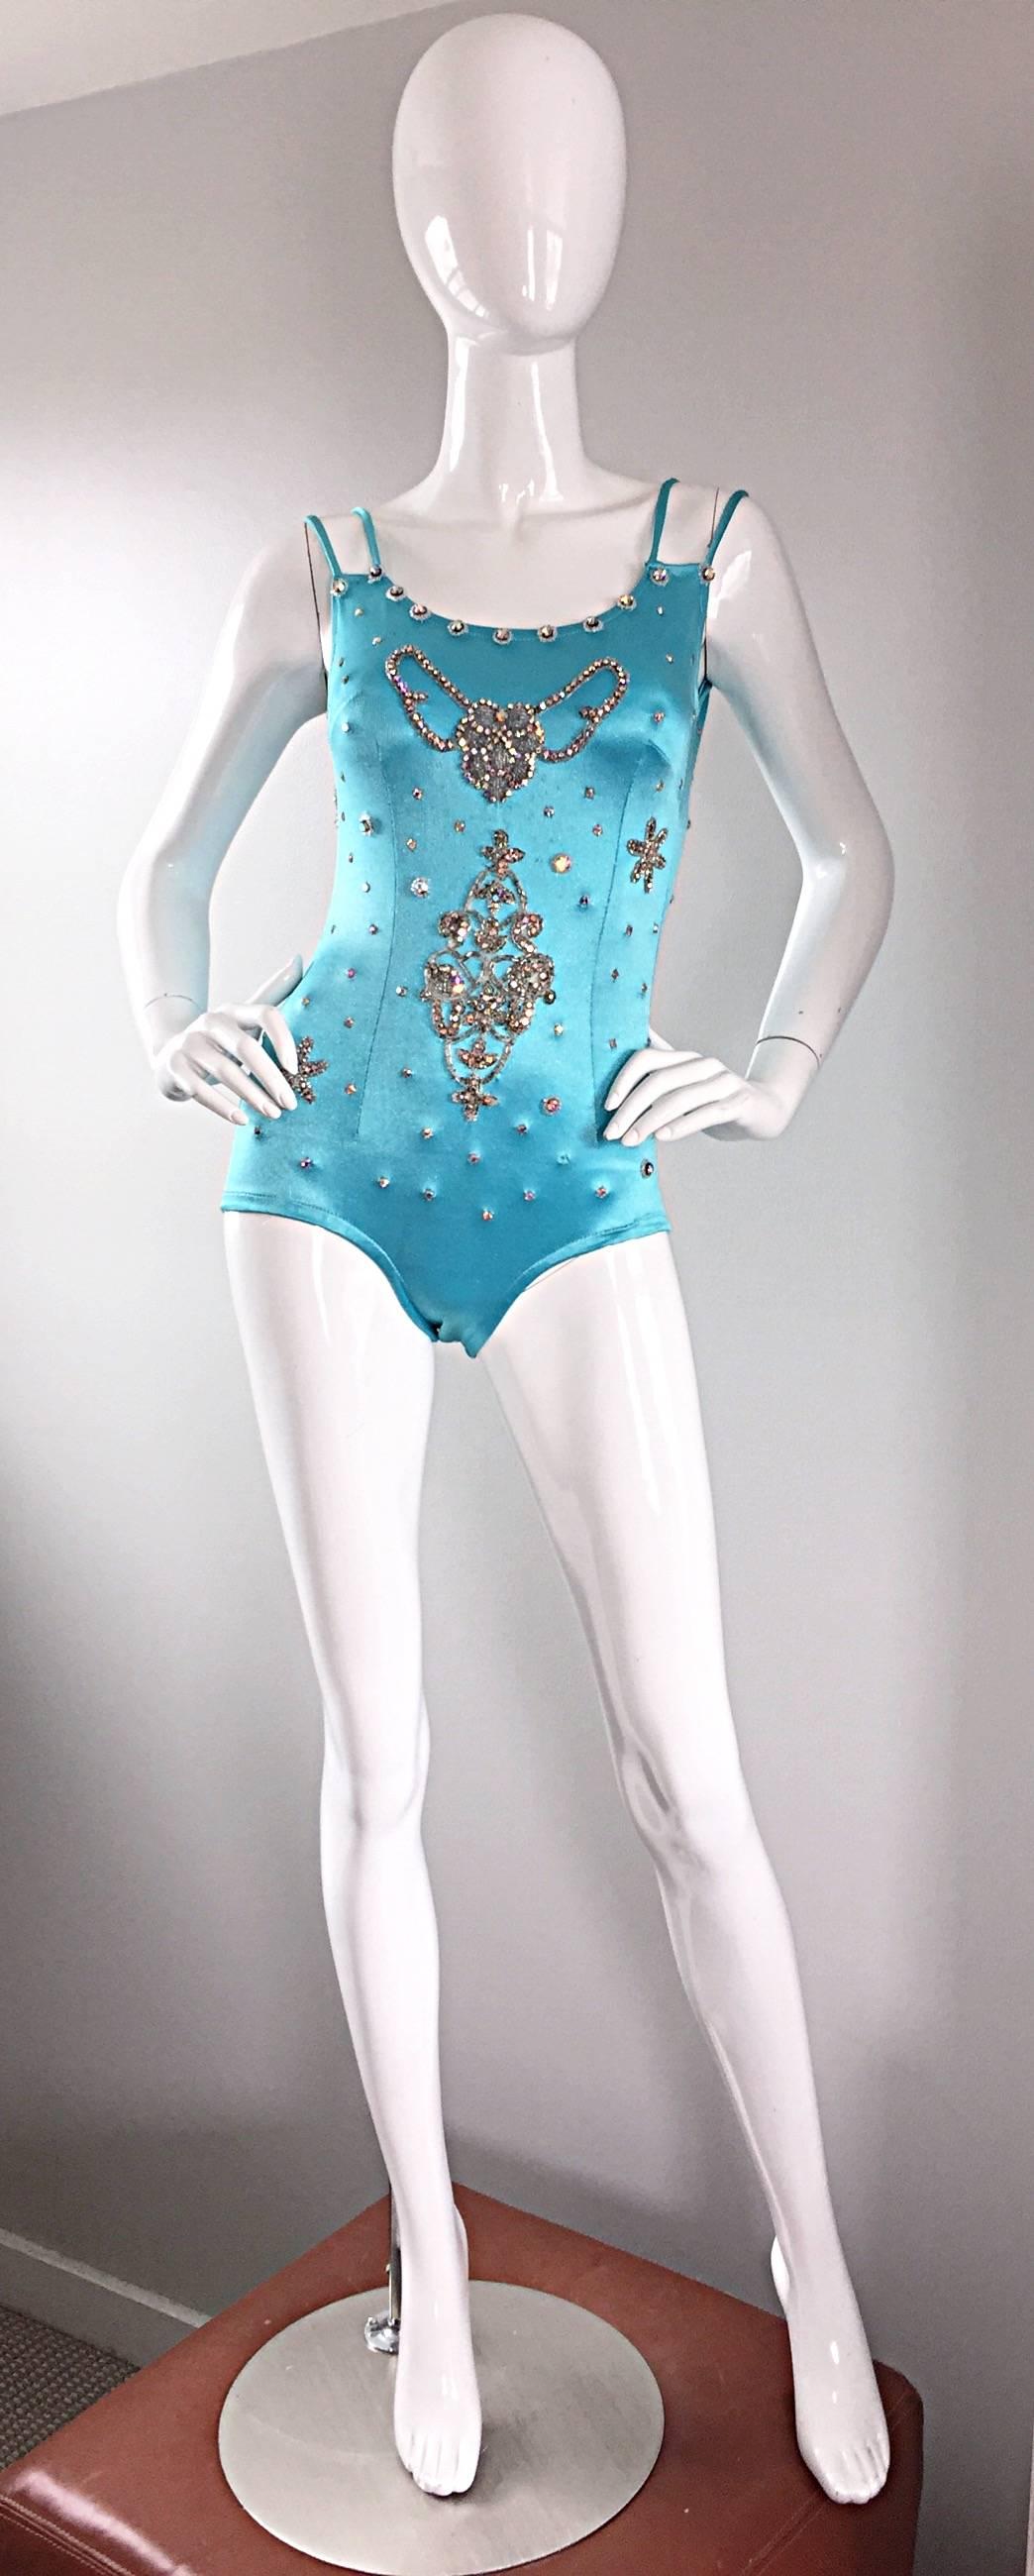 Incredible rare 1950s LAS VEGAS SHOWGIRL leotard! Beautiful aqua blue color, with rhinestones of all shapes and sizes throughout! Double strap detail that twists in the back. Perfect as a leotard, a bodysuit worn with jeans or a skirt, or as a